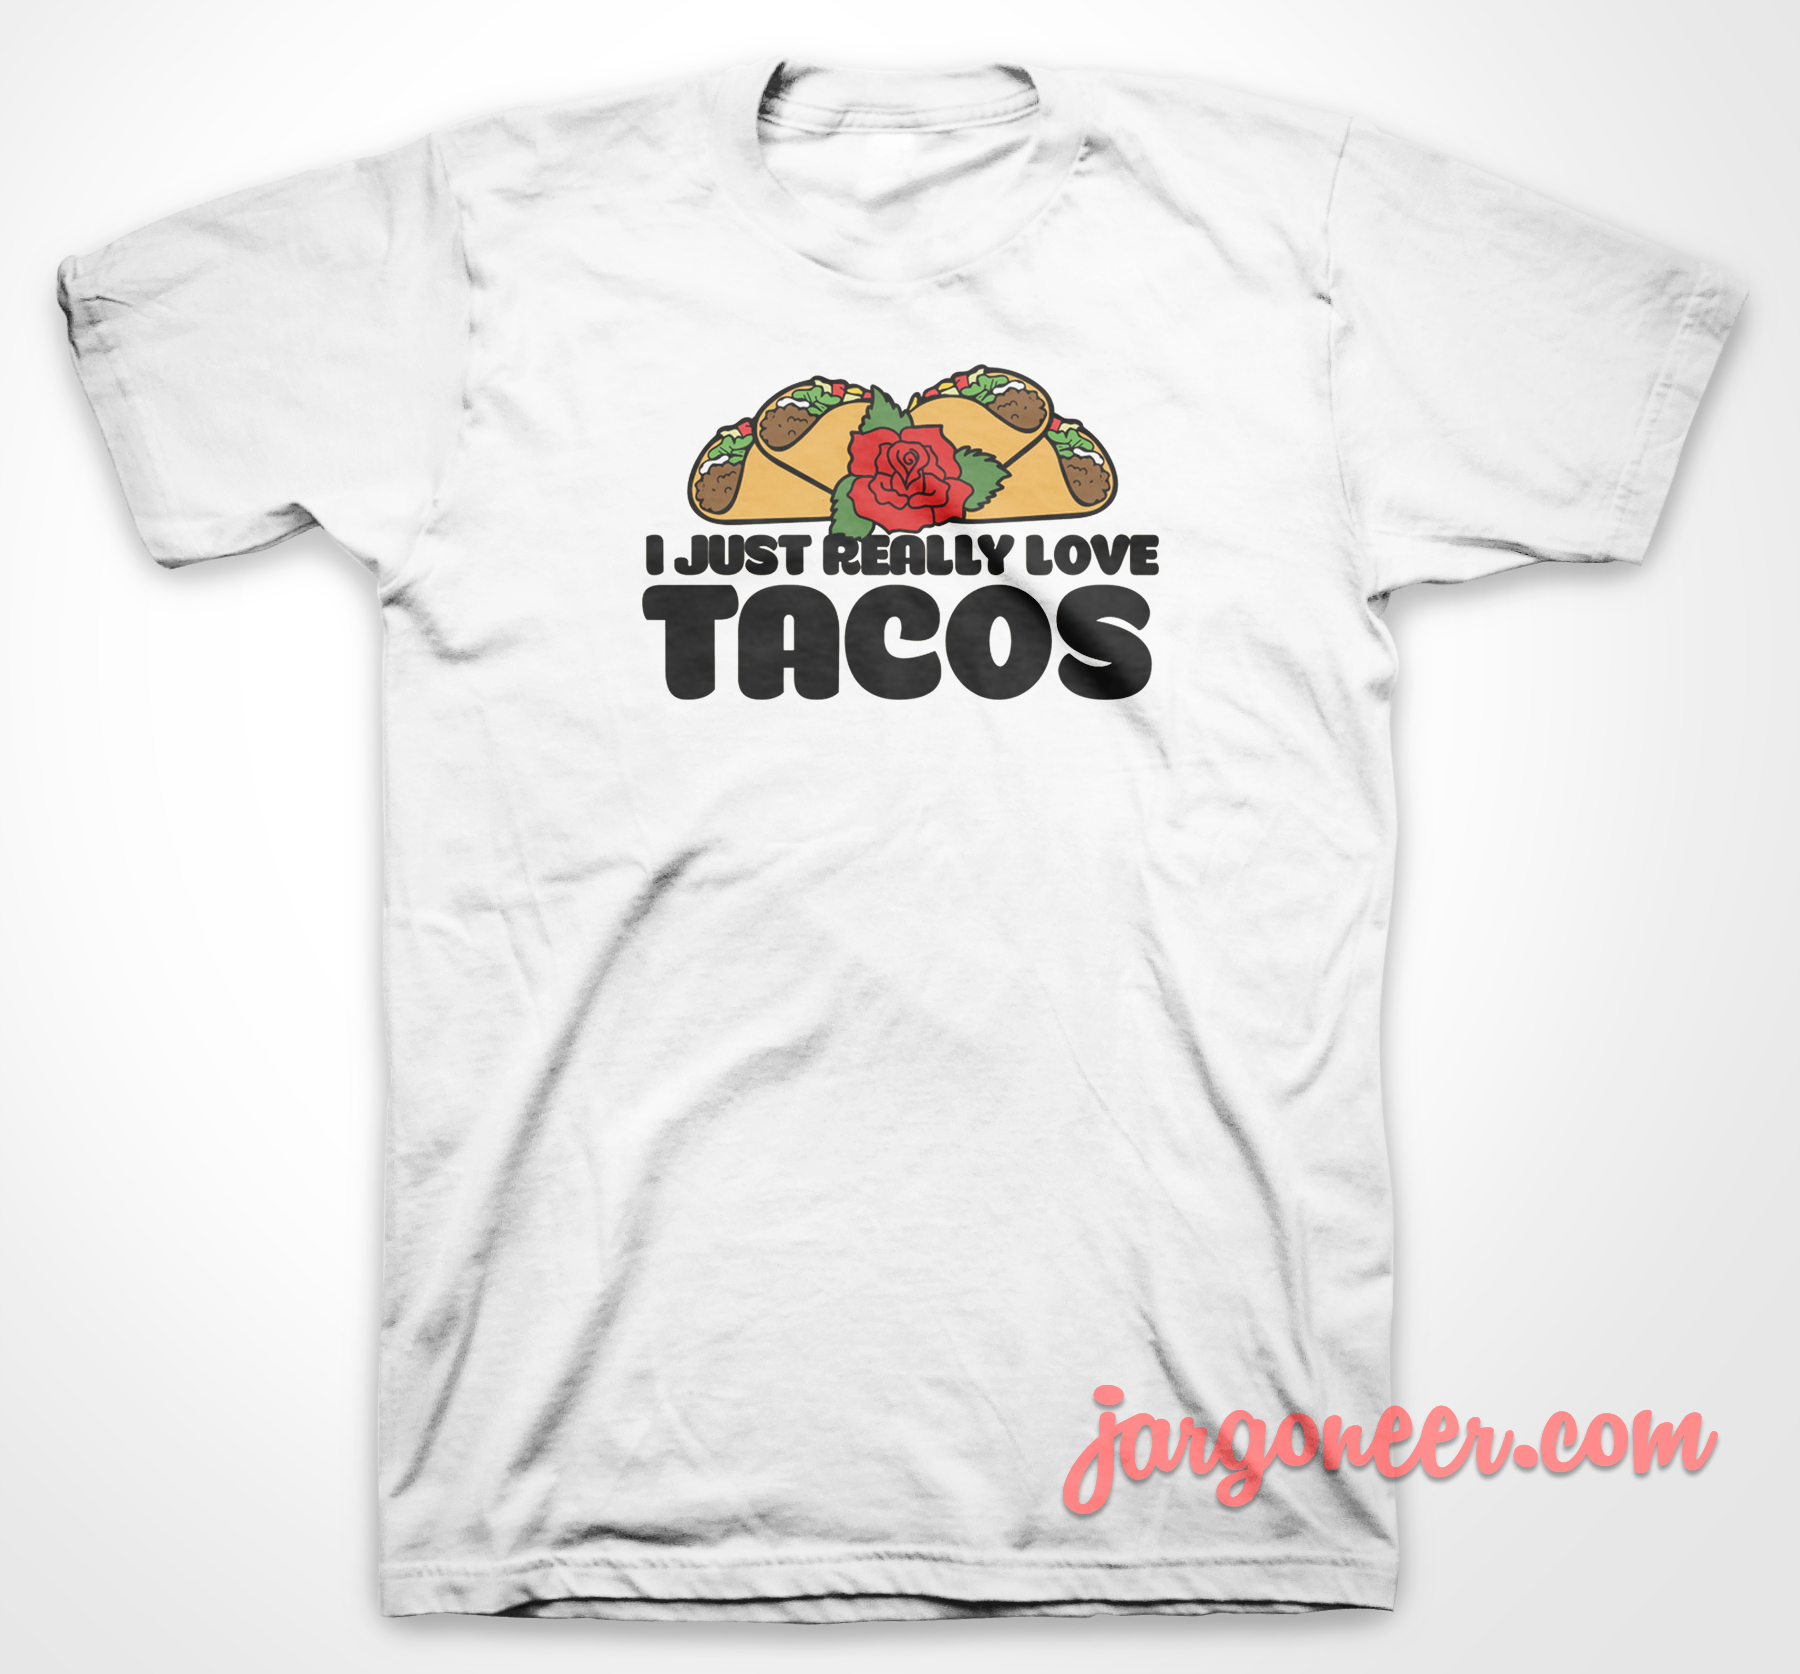 I Just Really Love Tacos - Shop Unique Graphic Cool Shirt Designs